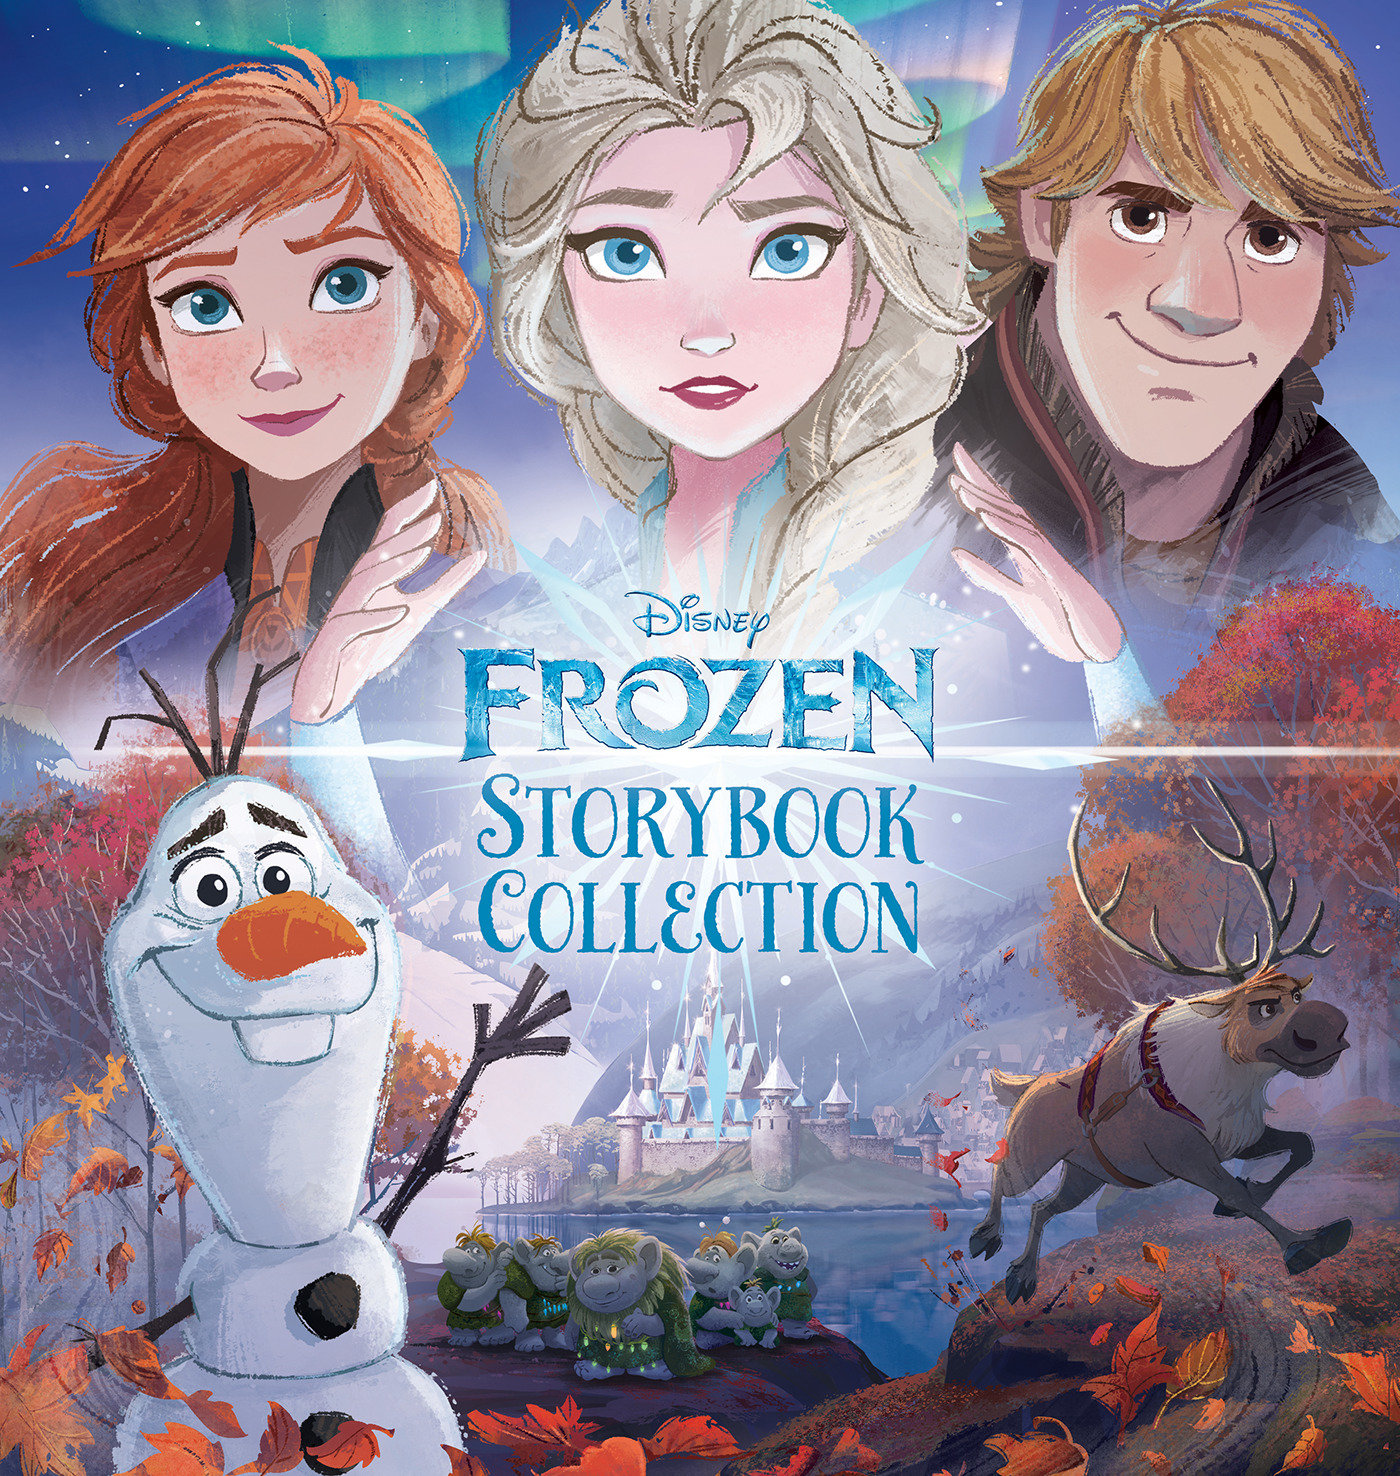 Disney Frozen Storybook Collection (Hardcover Book)